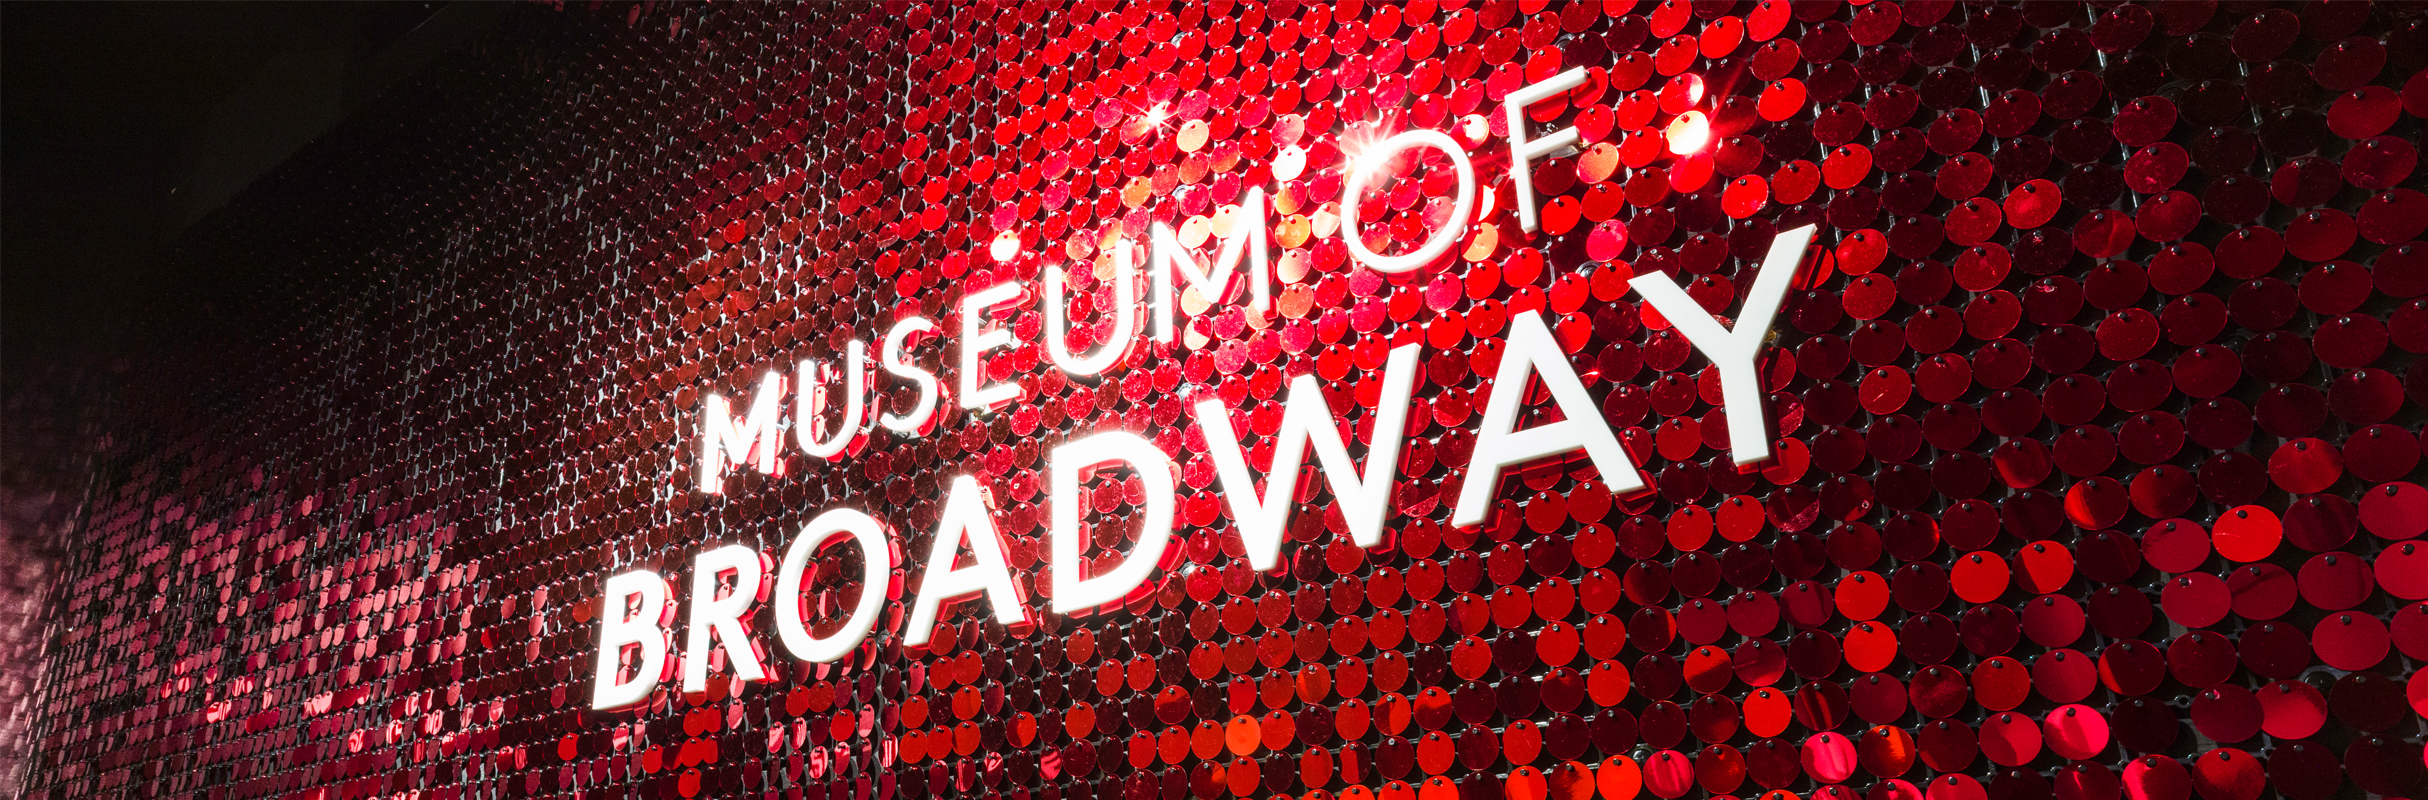 Museum of Broadway logo on red sequin wall.